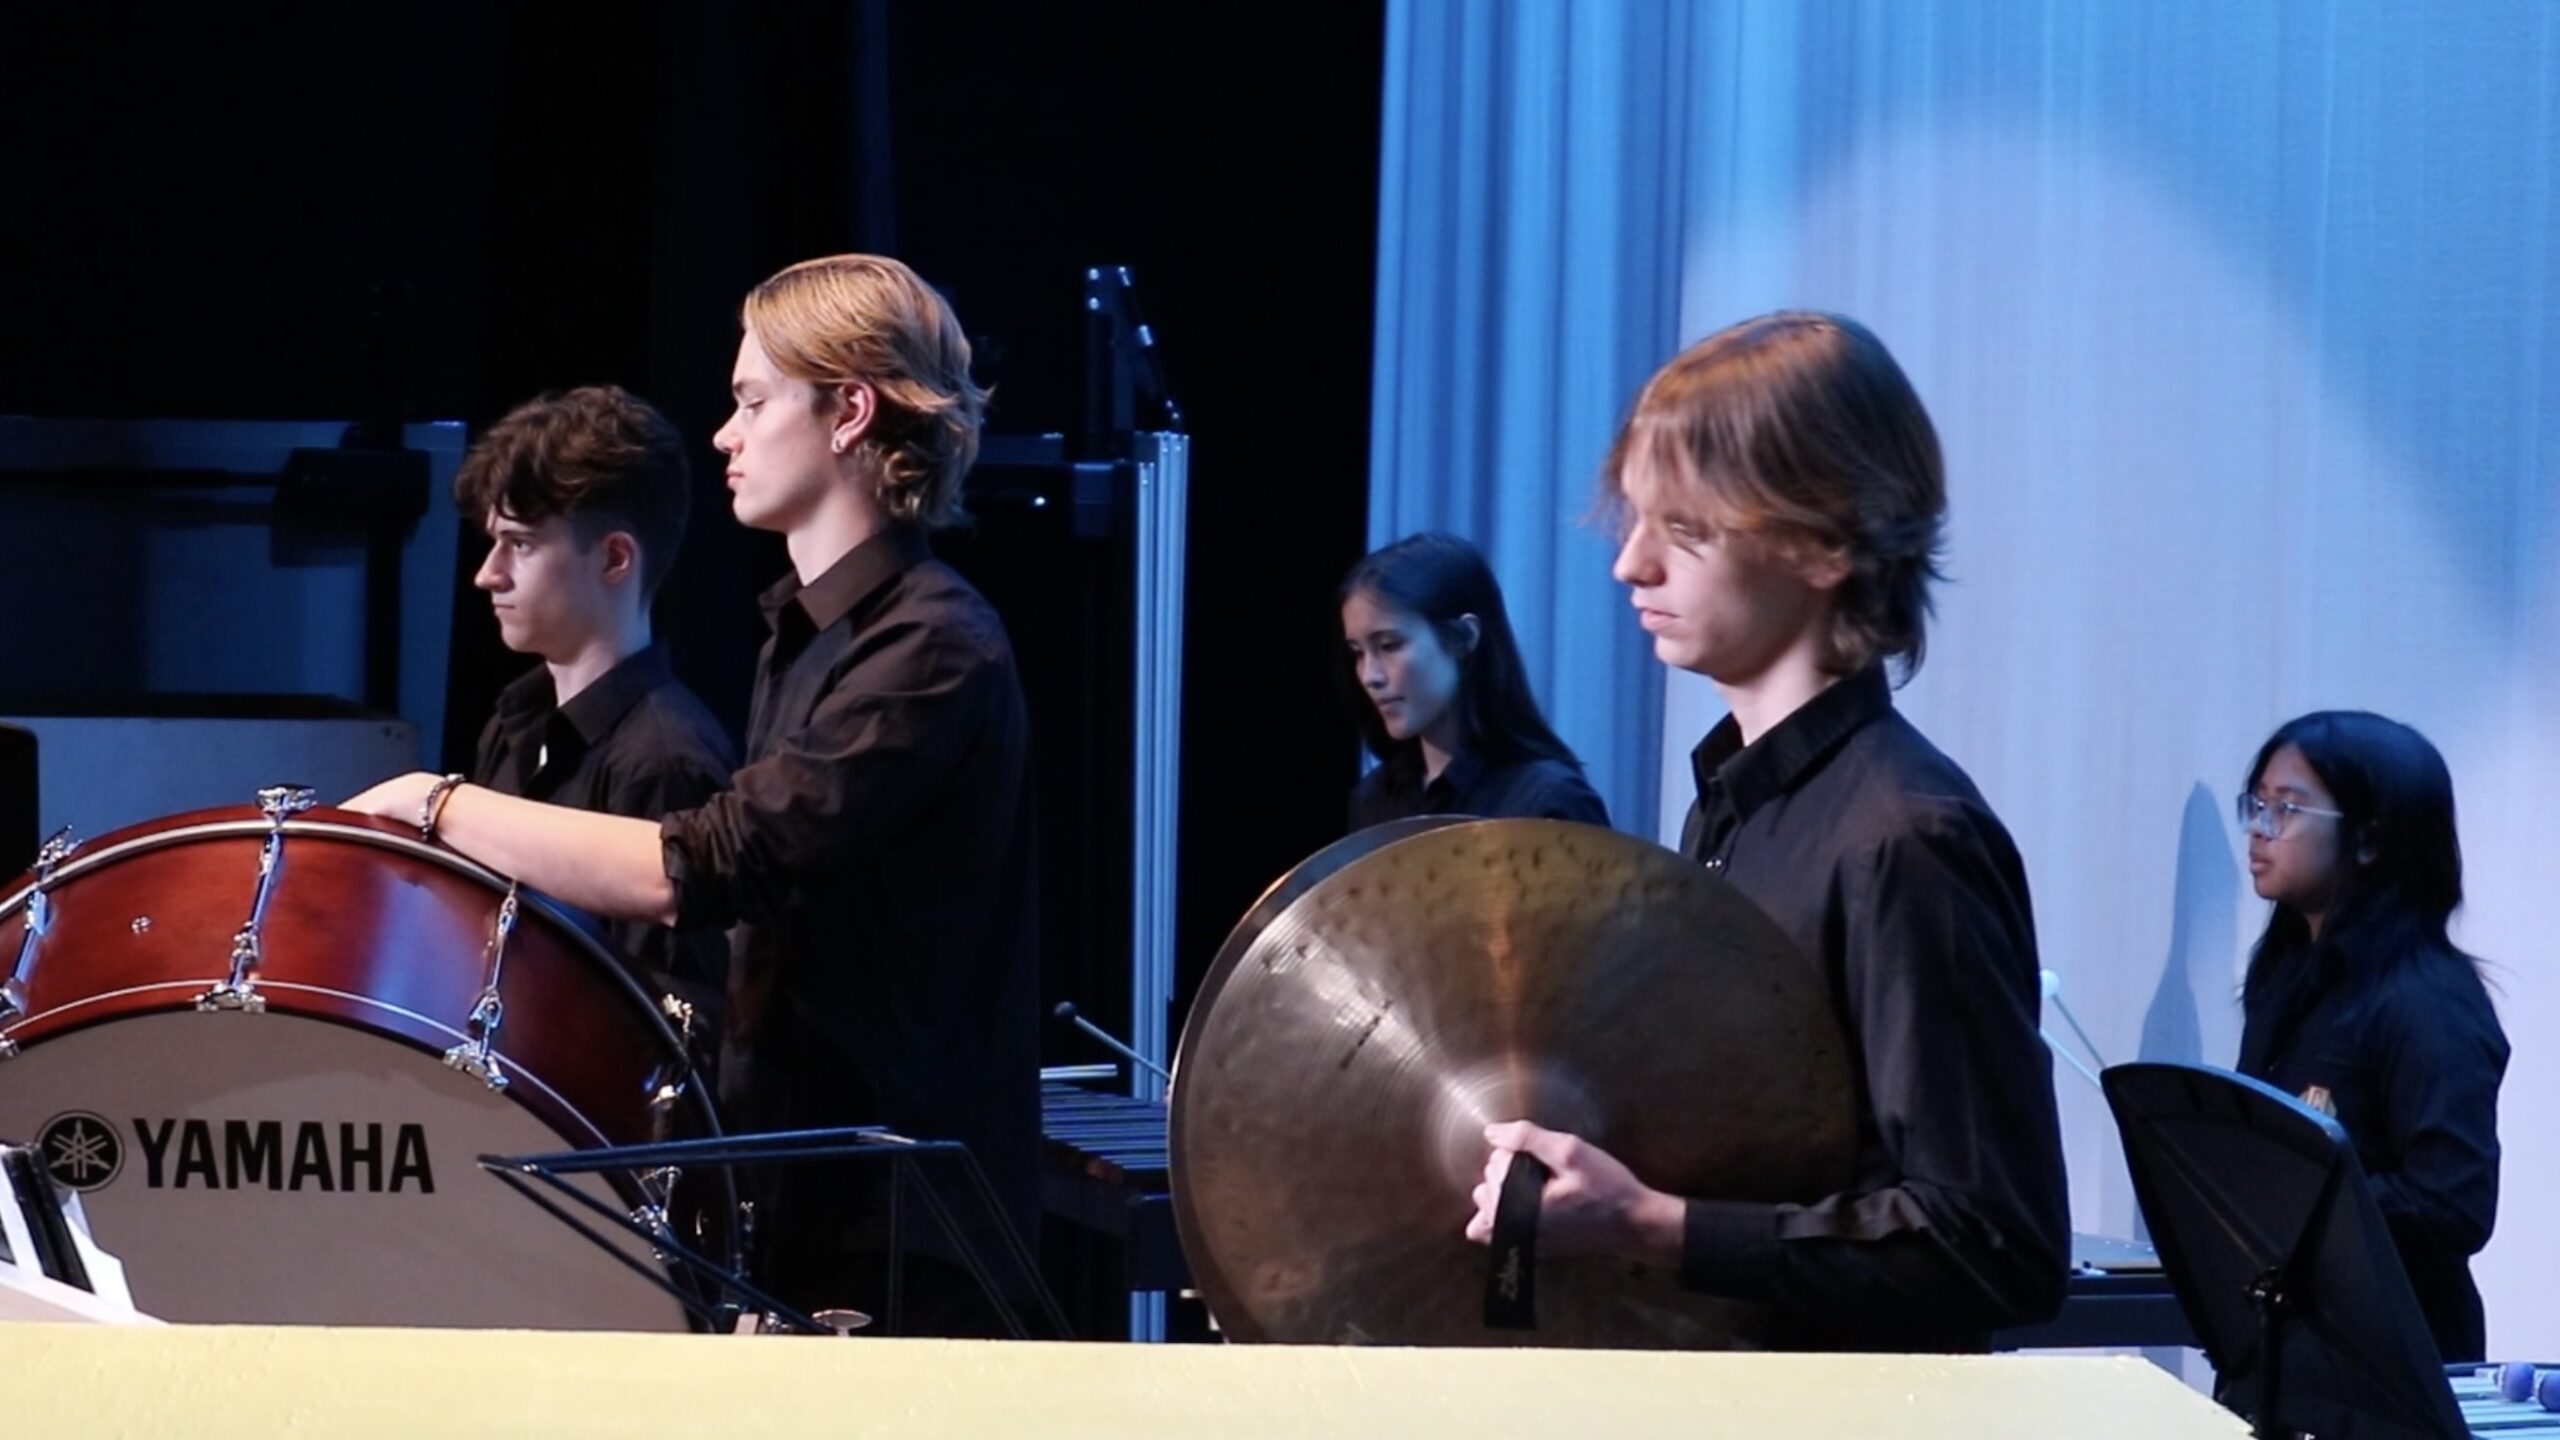 Two students playing percussion